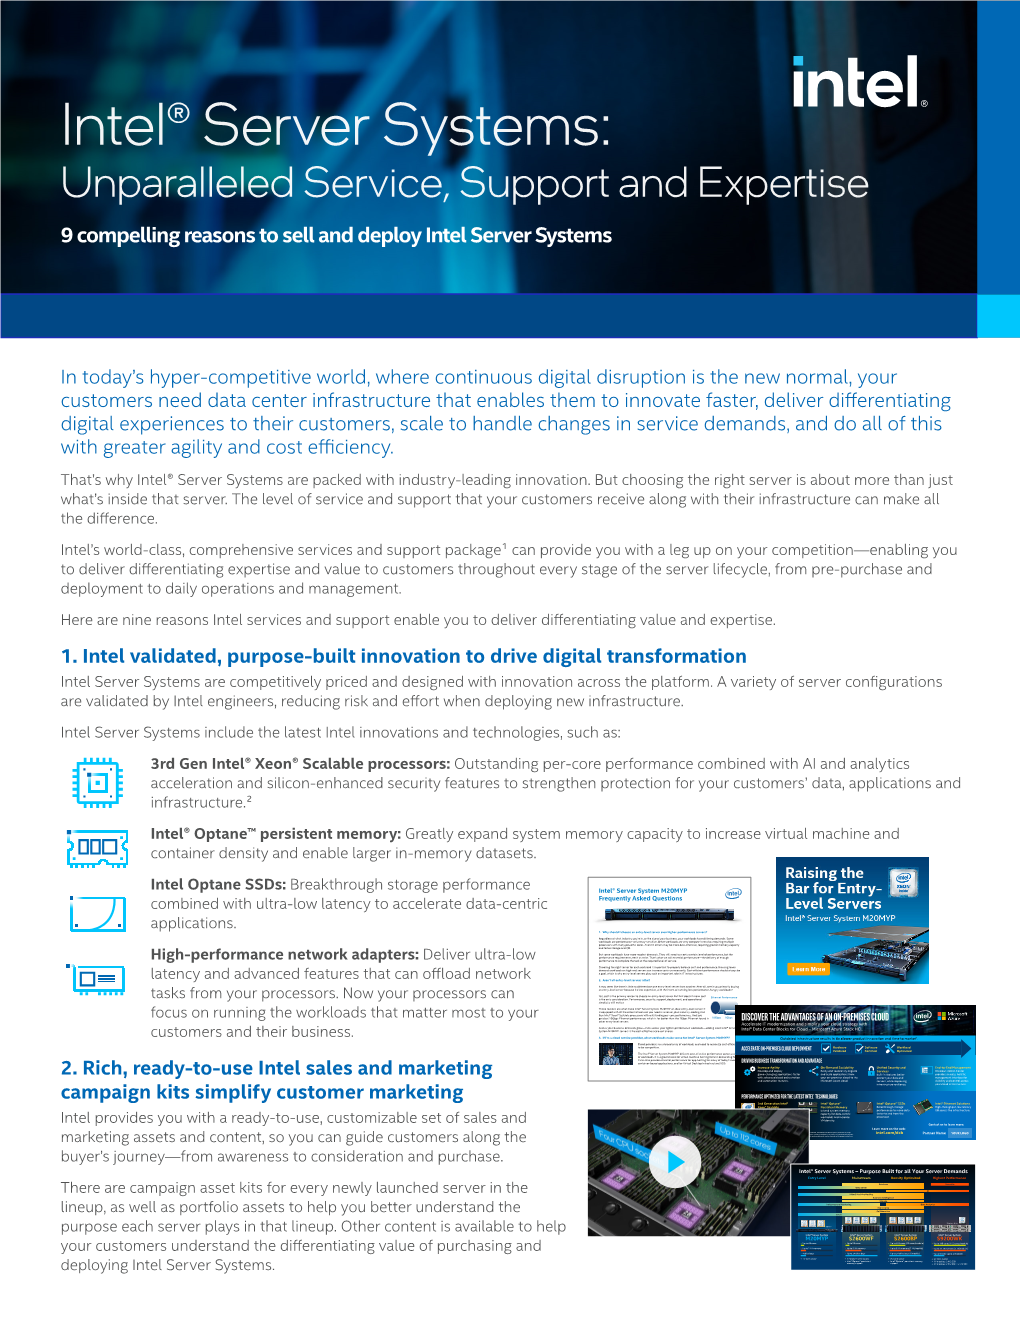 Intel® Server Systems: Unparalleled Service, Support and Expertise 9 Compelling Reasons to Sell and Deploy Intel Server Systems